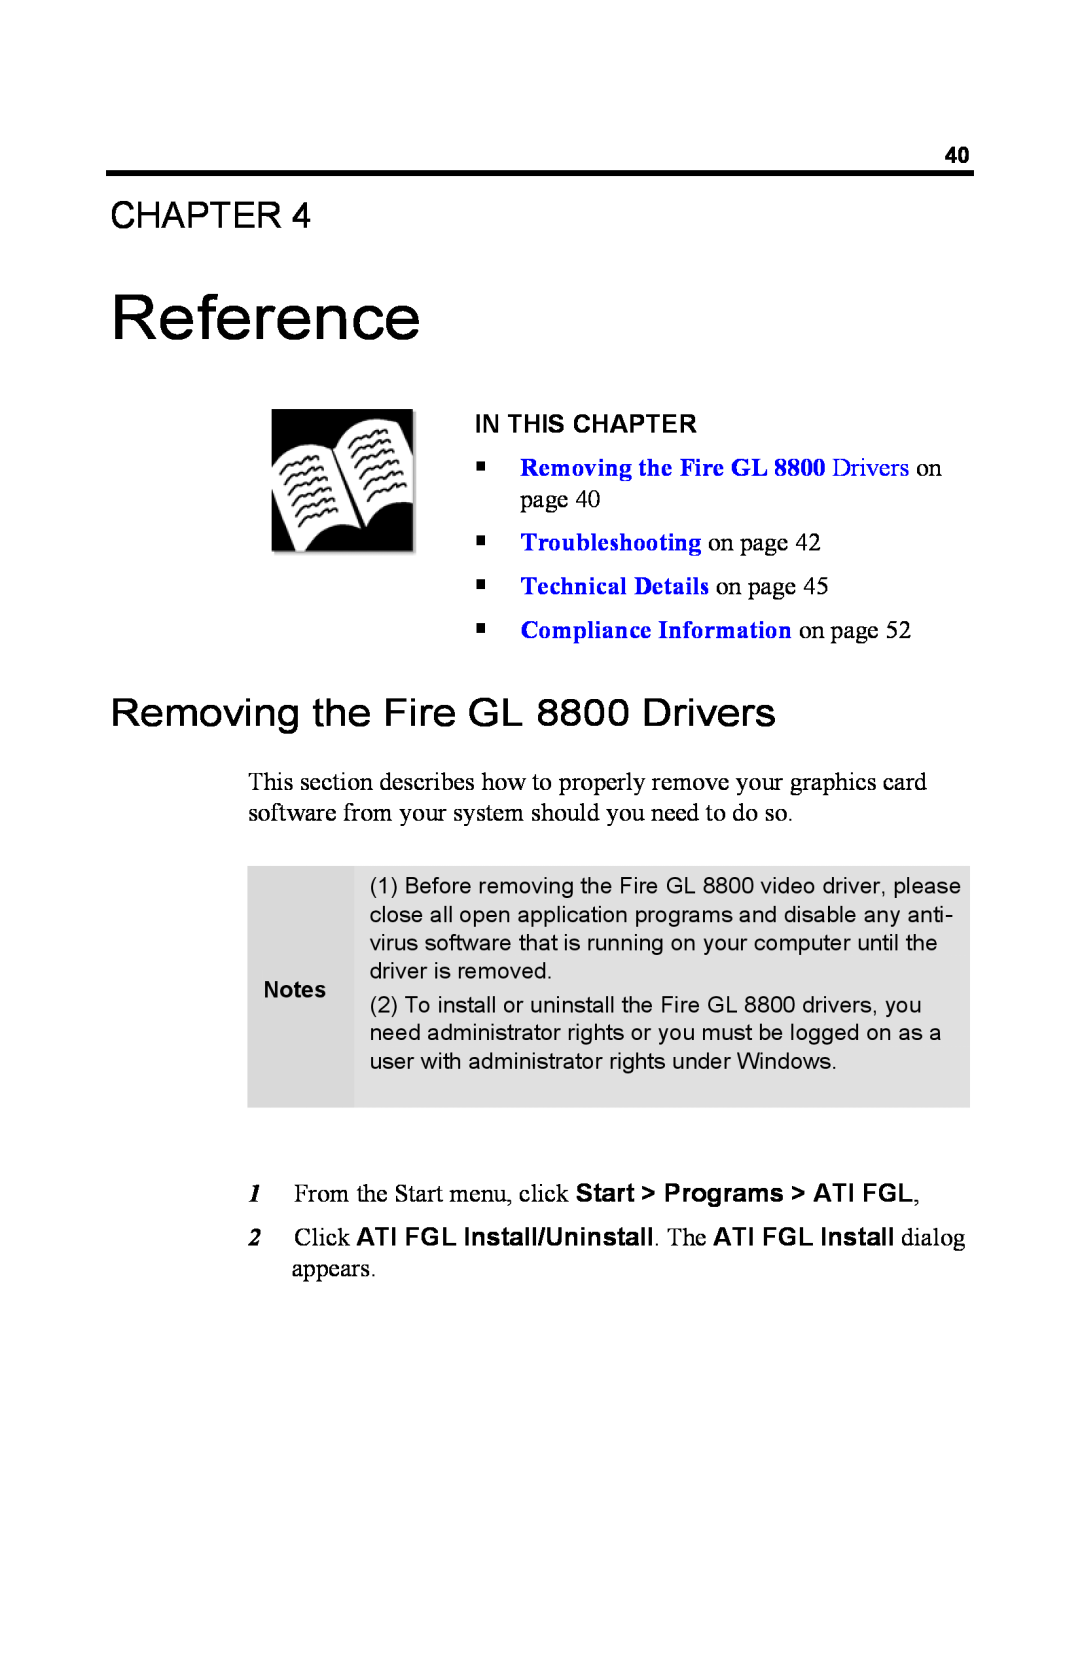 ATI Technologies Reference, Removing the Fire GL 8800 Drivers on, Troubleshooting on page Technical Details on page 